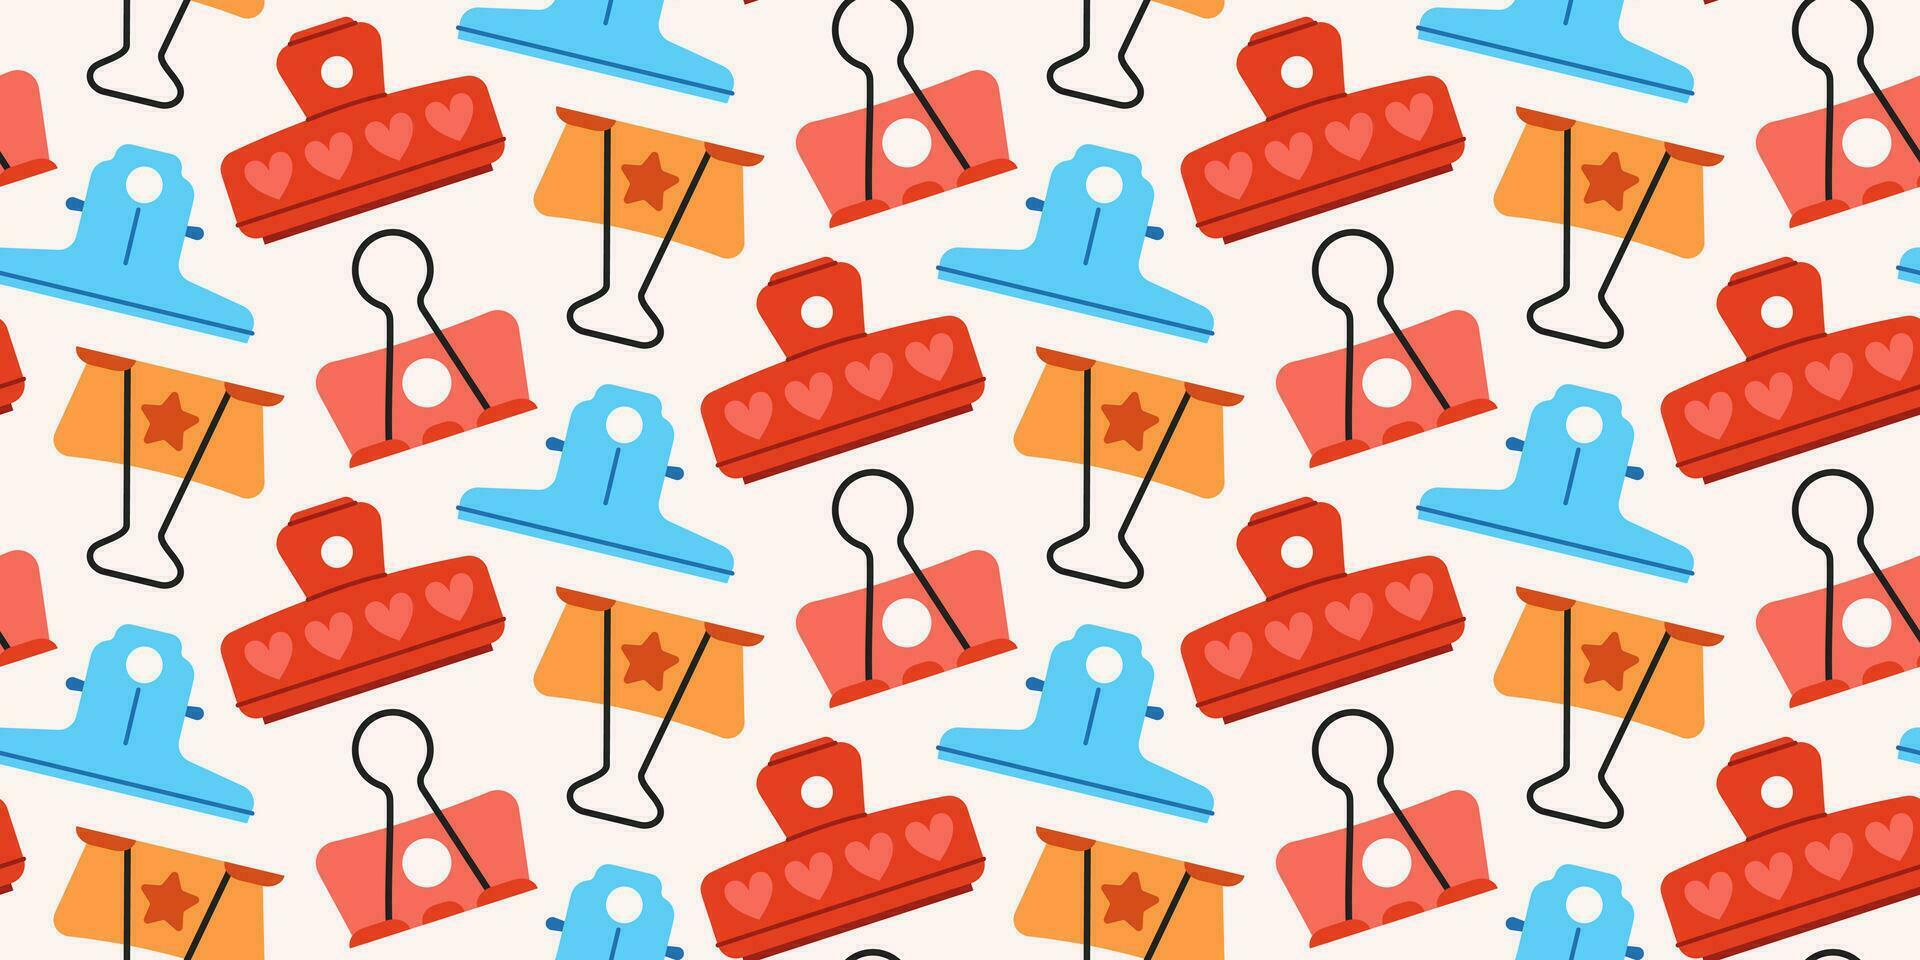 Seamless pattern with cute paper clips, clamps and binders on light background. vector